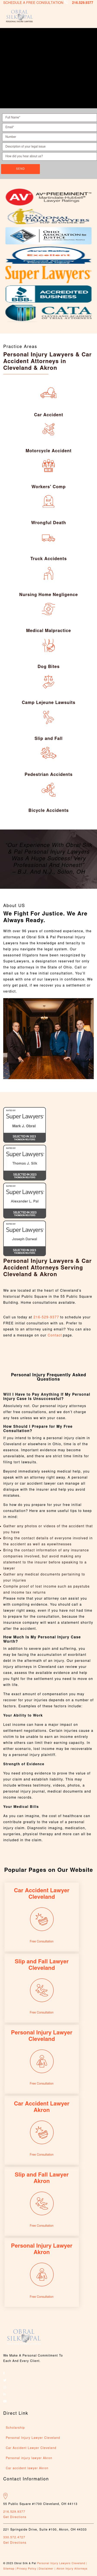 Obral Silk & Associates - Cleveland OH Lawyers